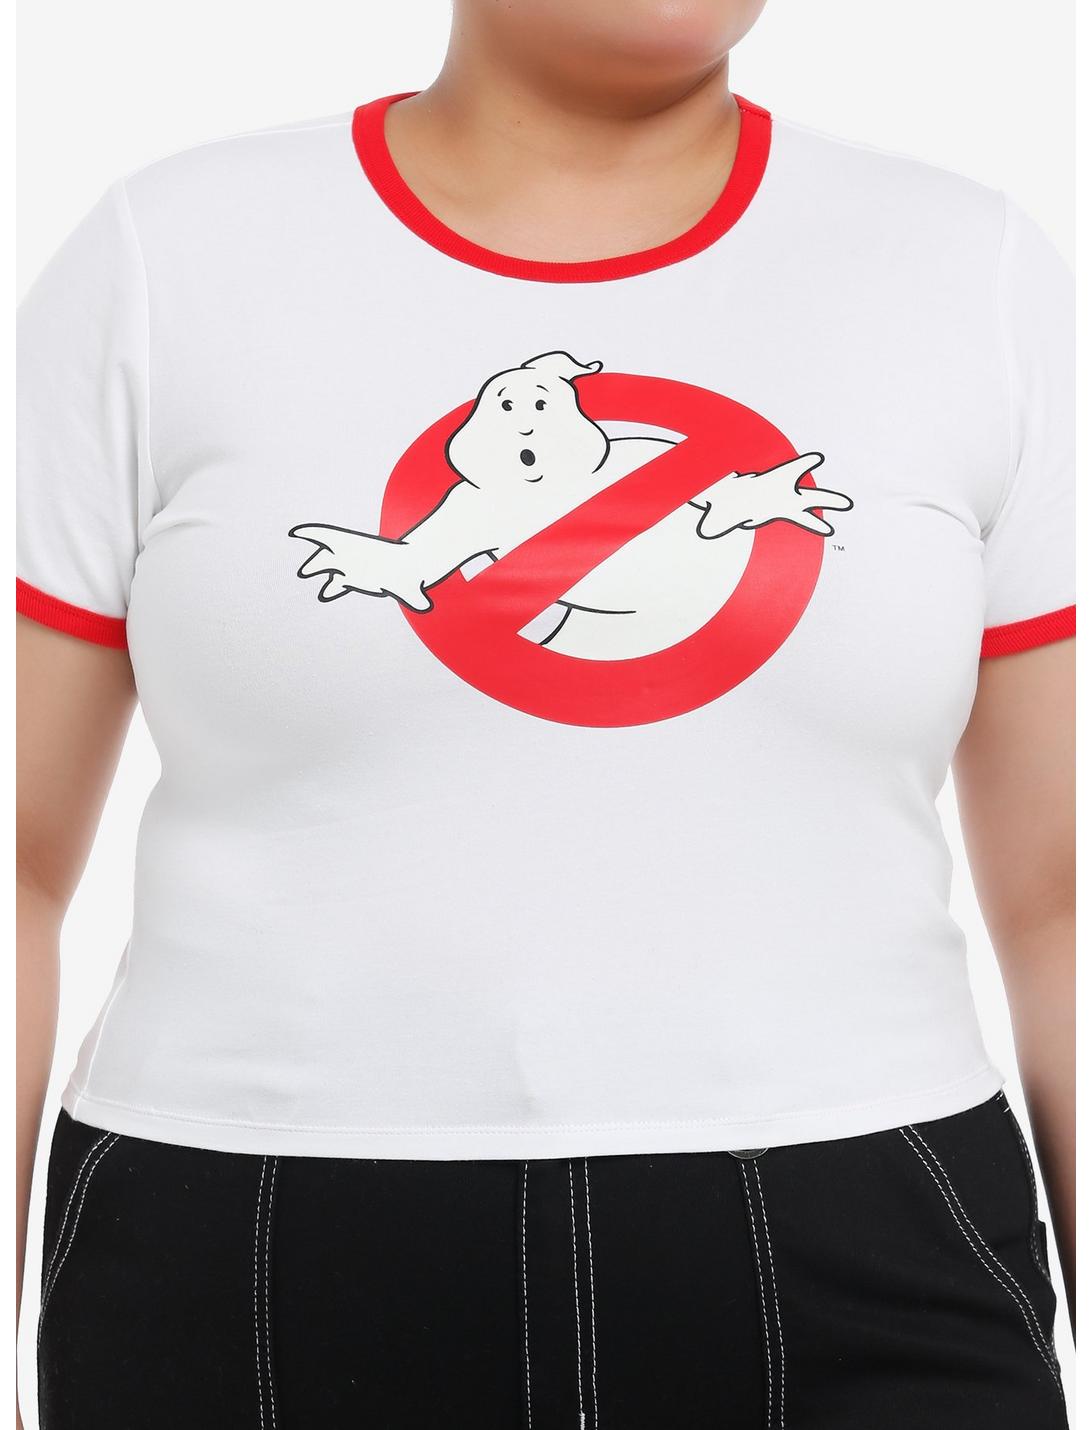 Her Universe Ghostbusters Logo Glow-In-The-Dark Girls Baby Ringer T-Shirt Plus Size, RED, hi-res